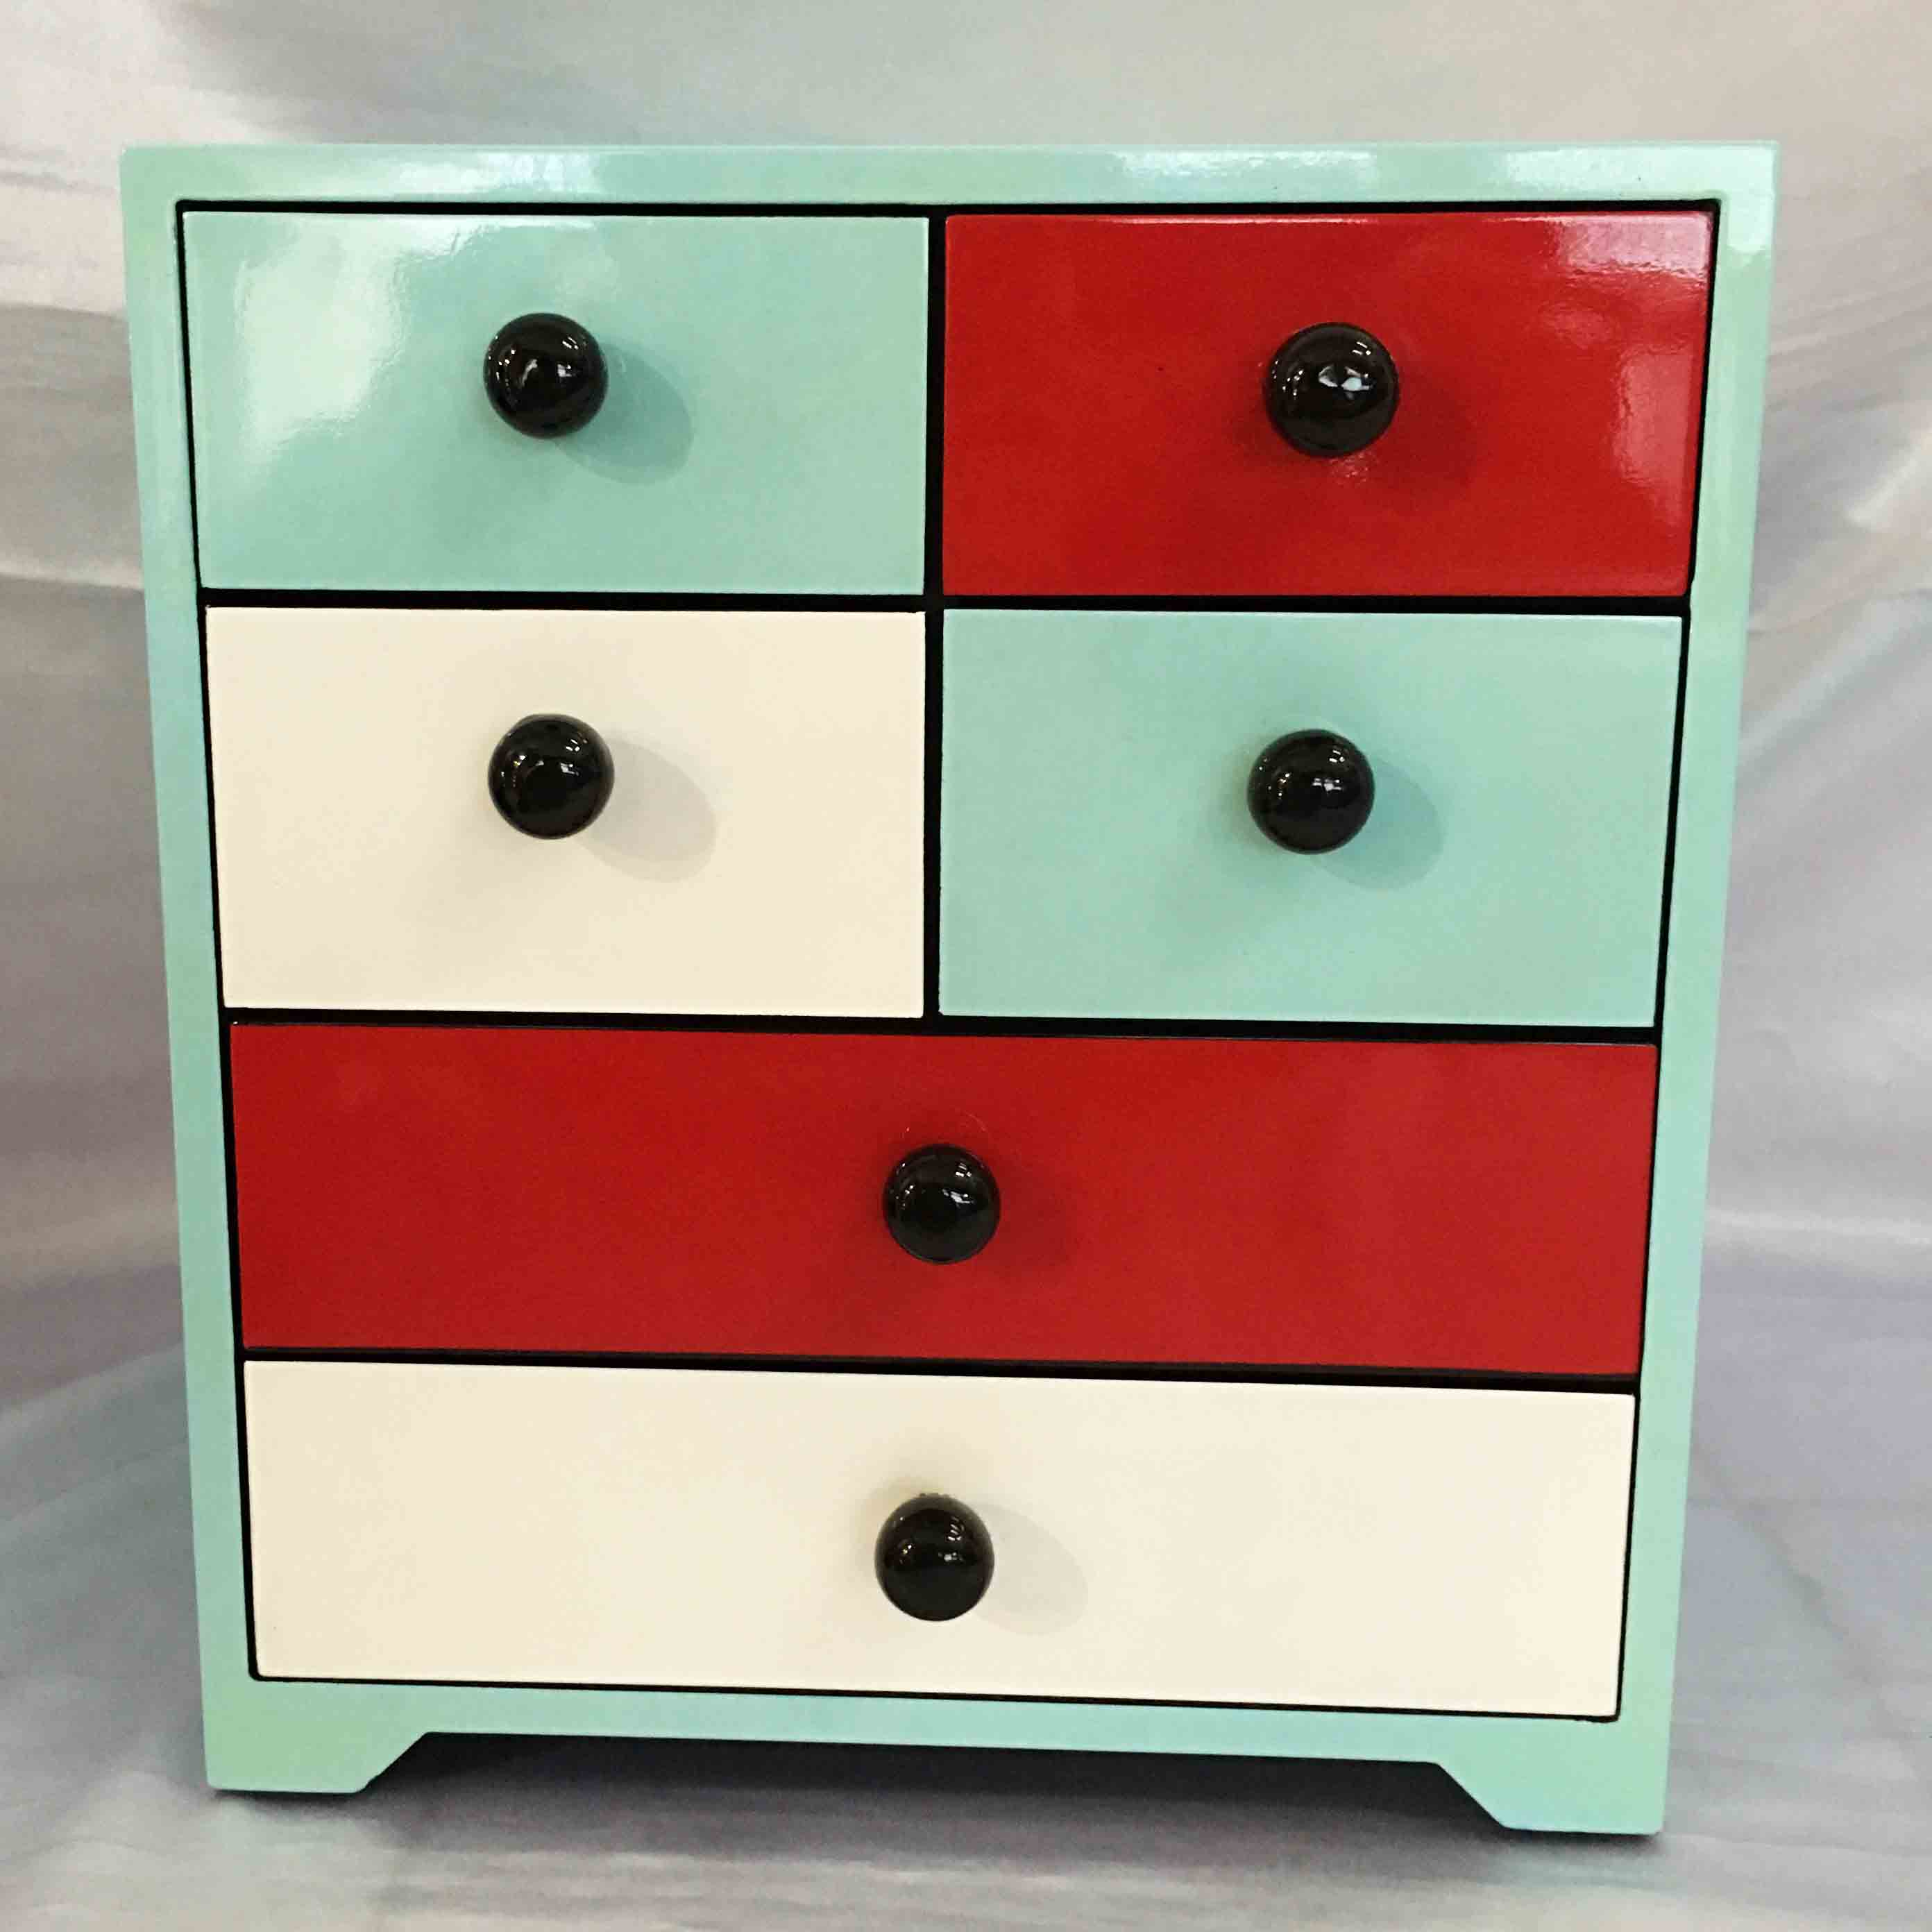 6 DRAWERS CABINET